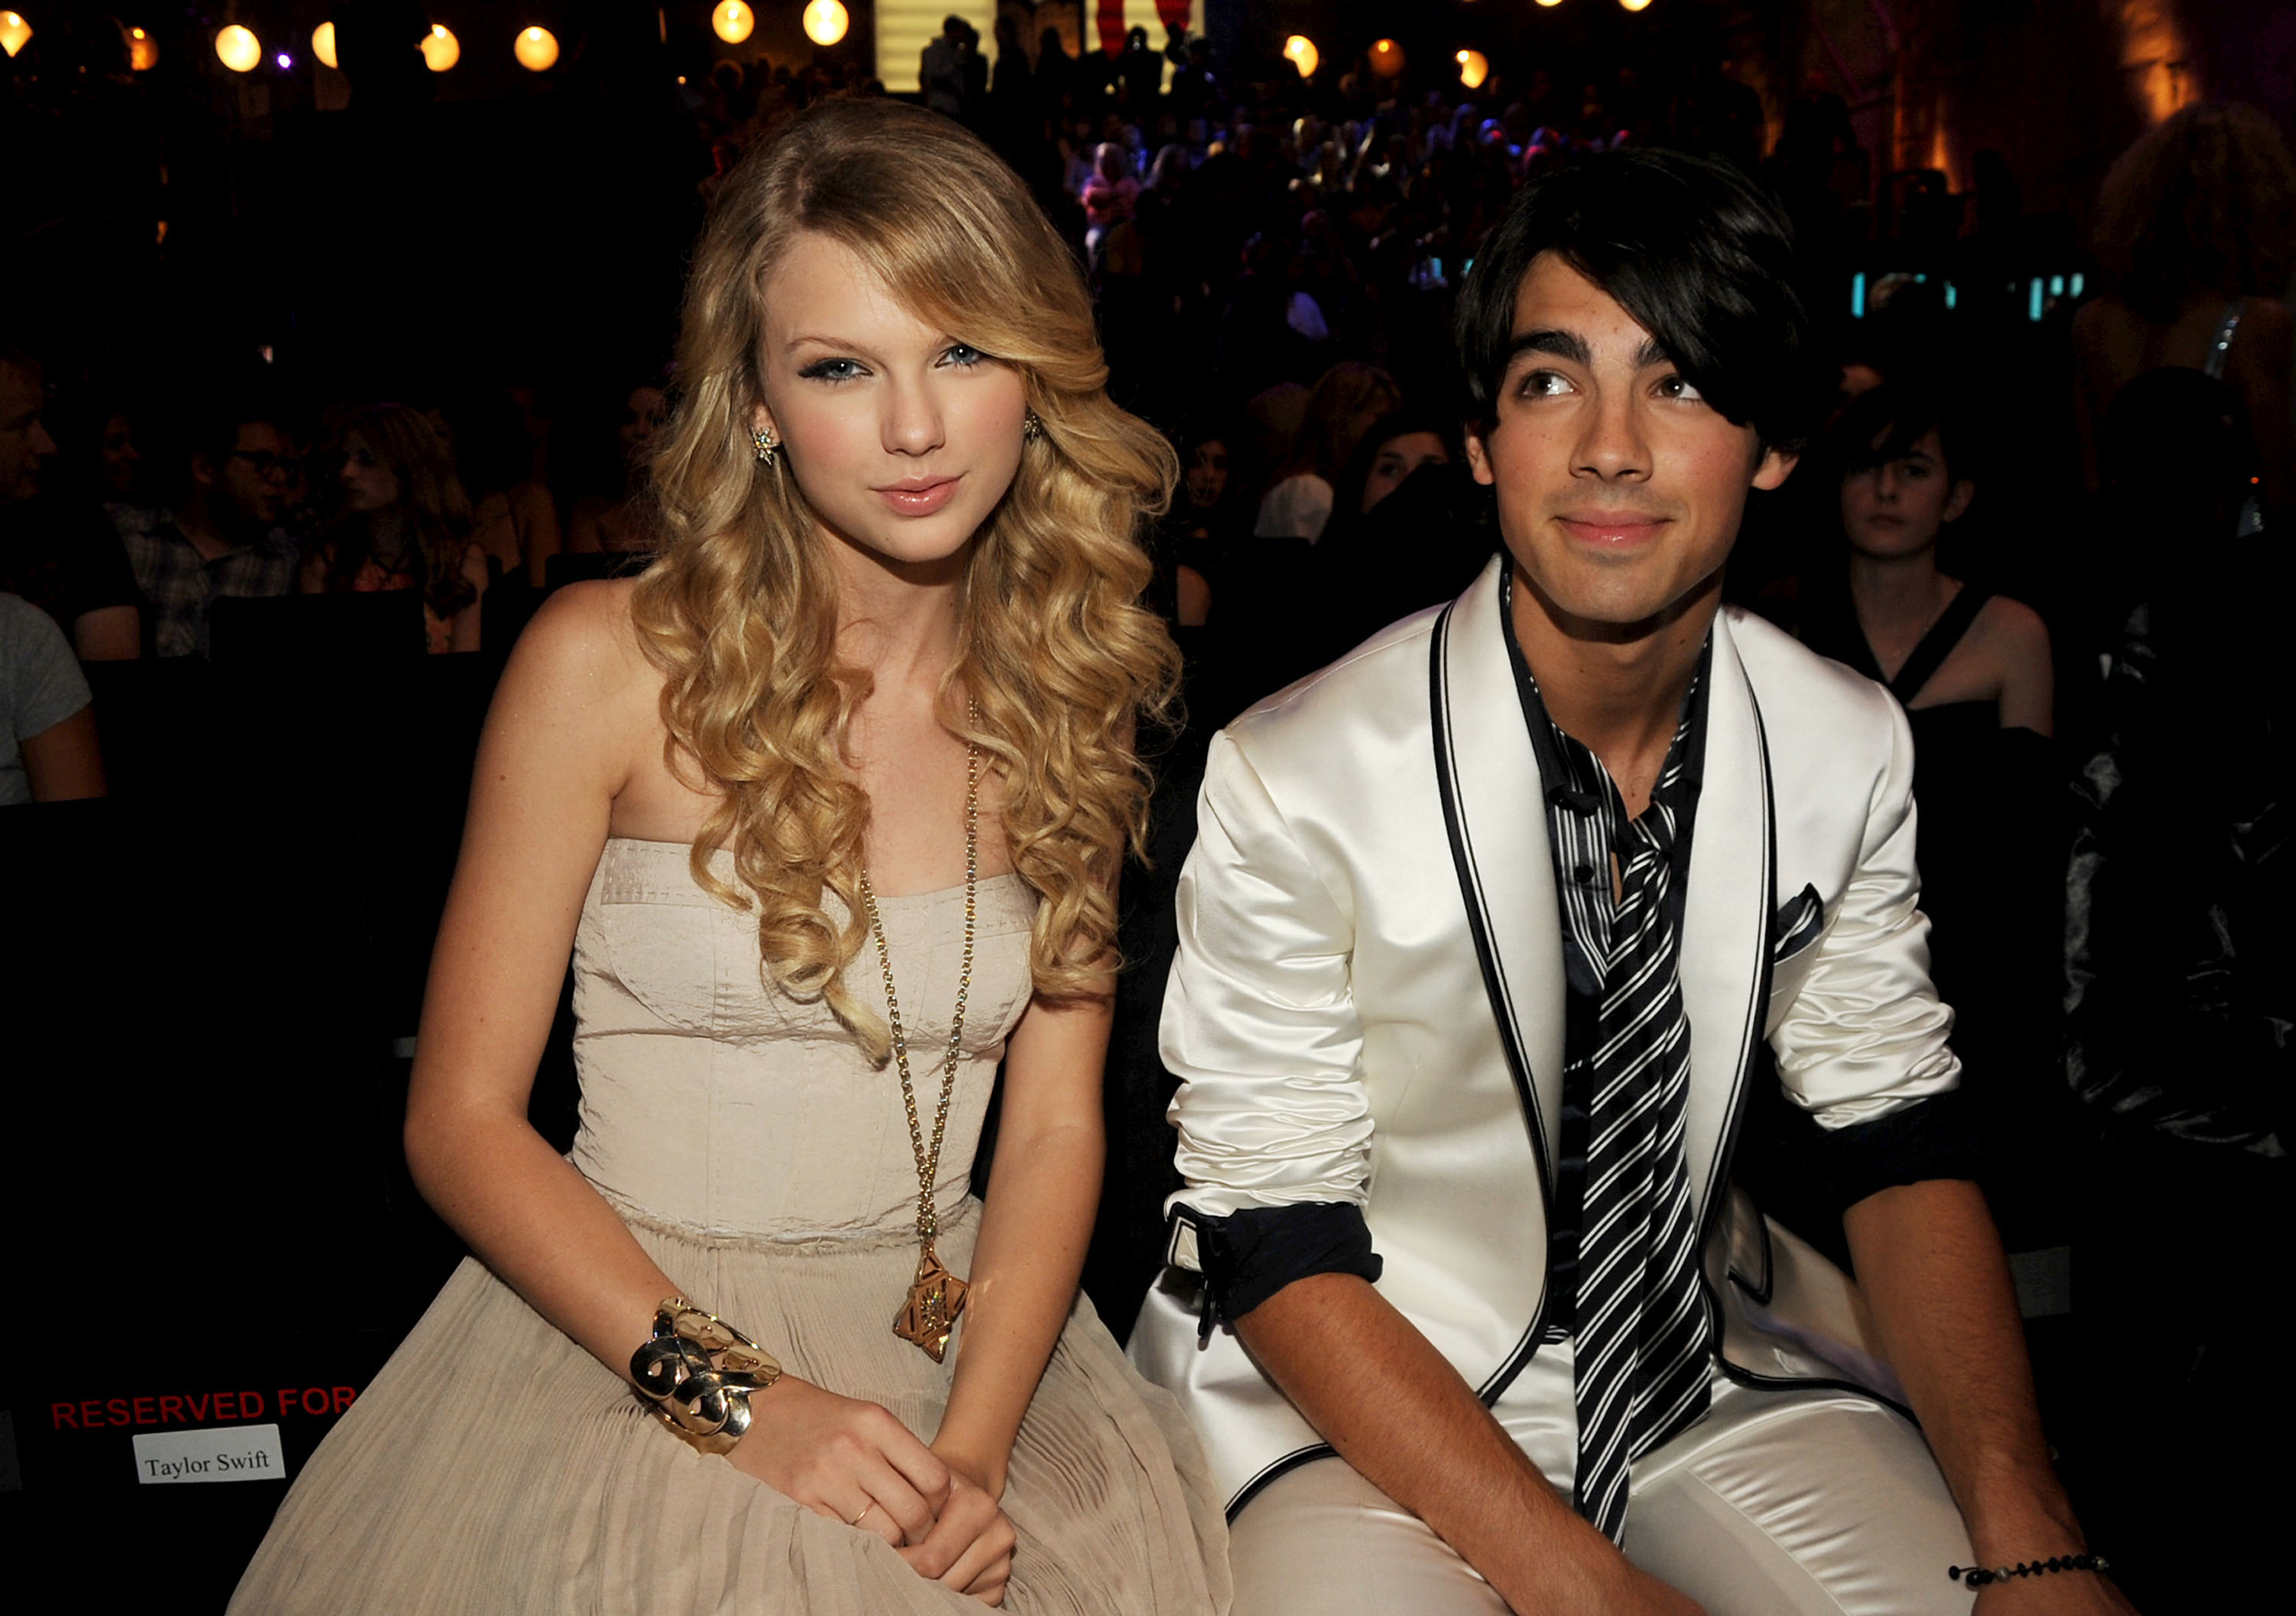 Singers Taylor Swift and Joe Jonas at the 2008 MTV Video Music Awards at Paramount Pictures Studios in Los Angeles on Sept. 7, 2008. (Jeff Kravitz—FilmMagic/Getty Images)